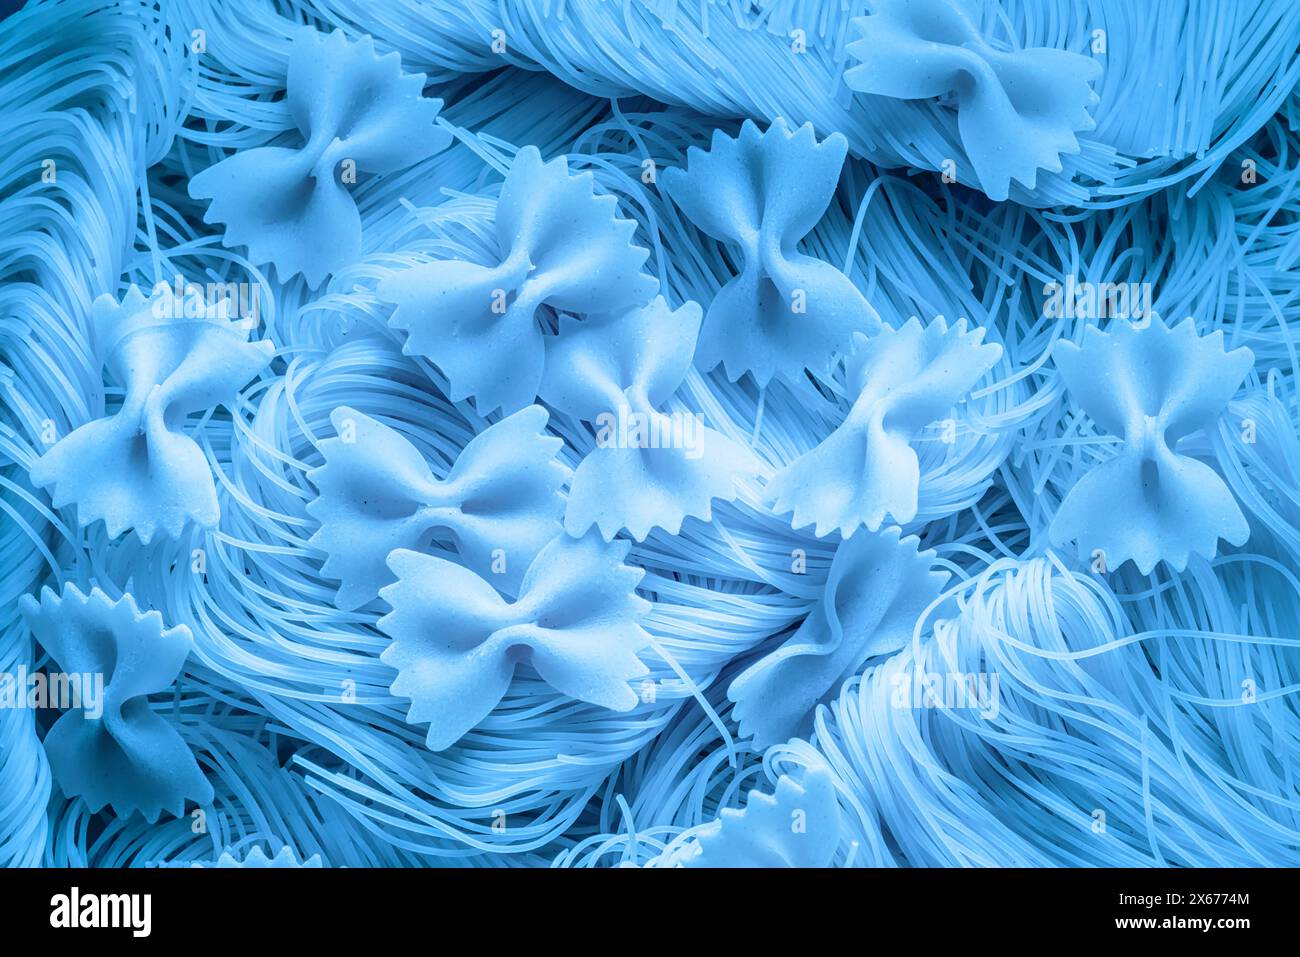 Blue colored food background made with italian pasta. Stock Photo